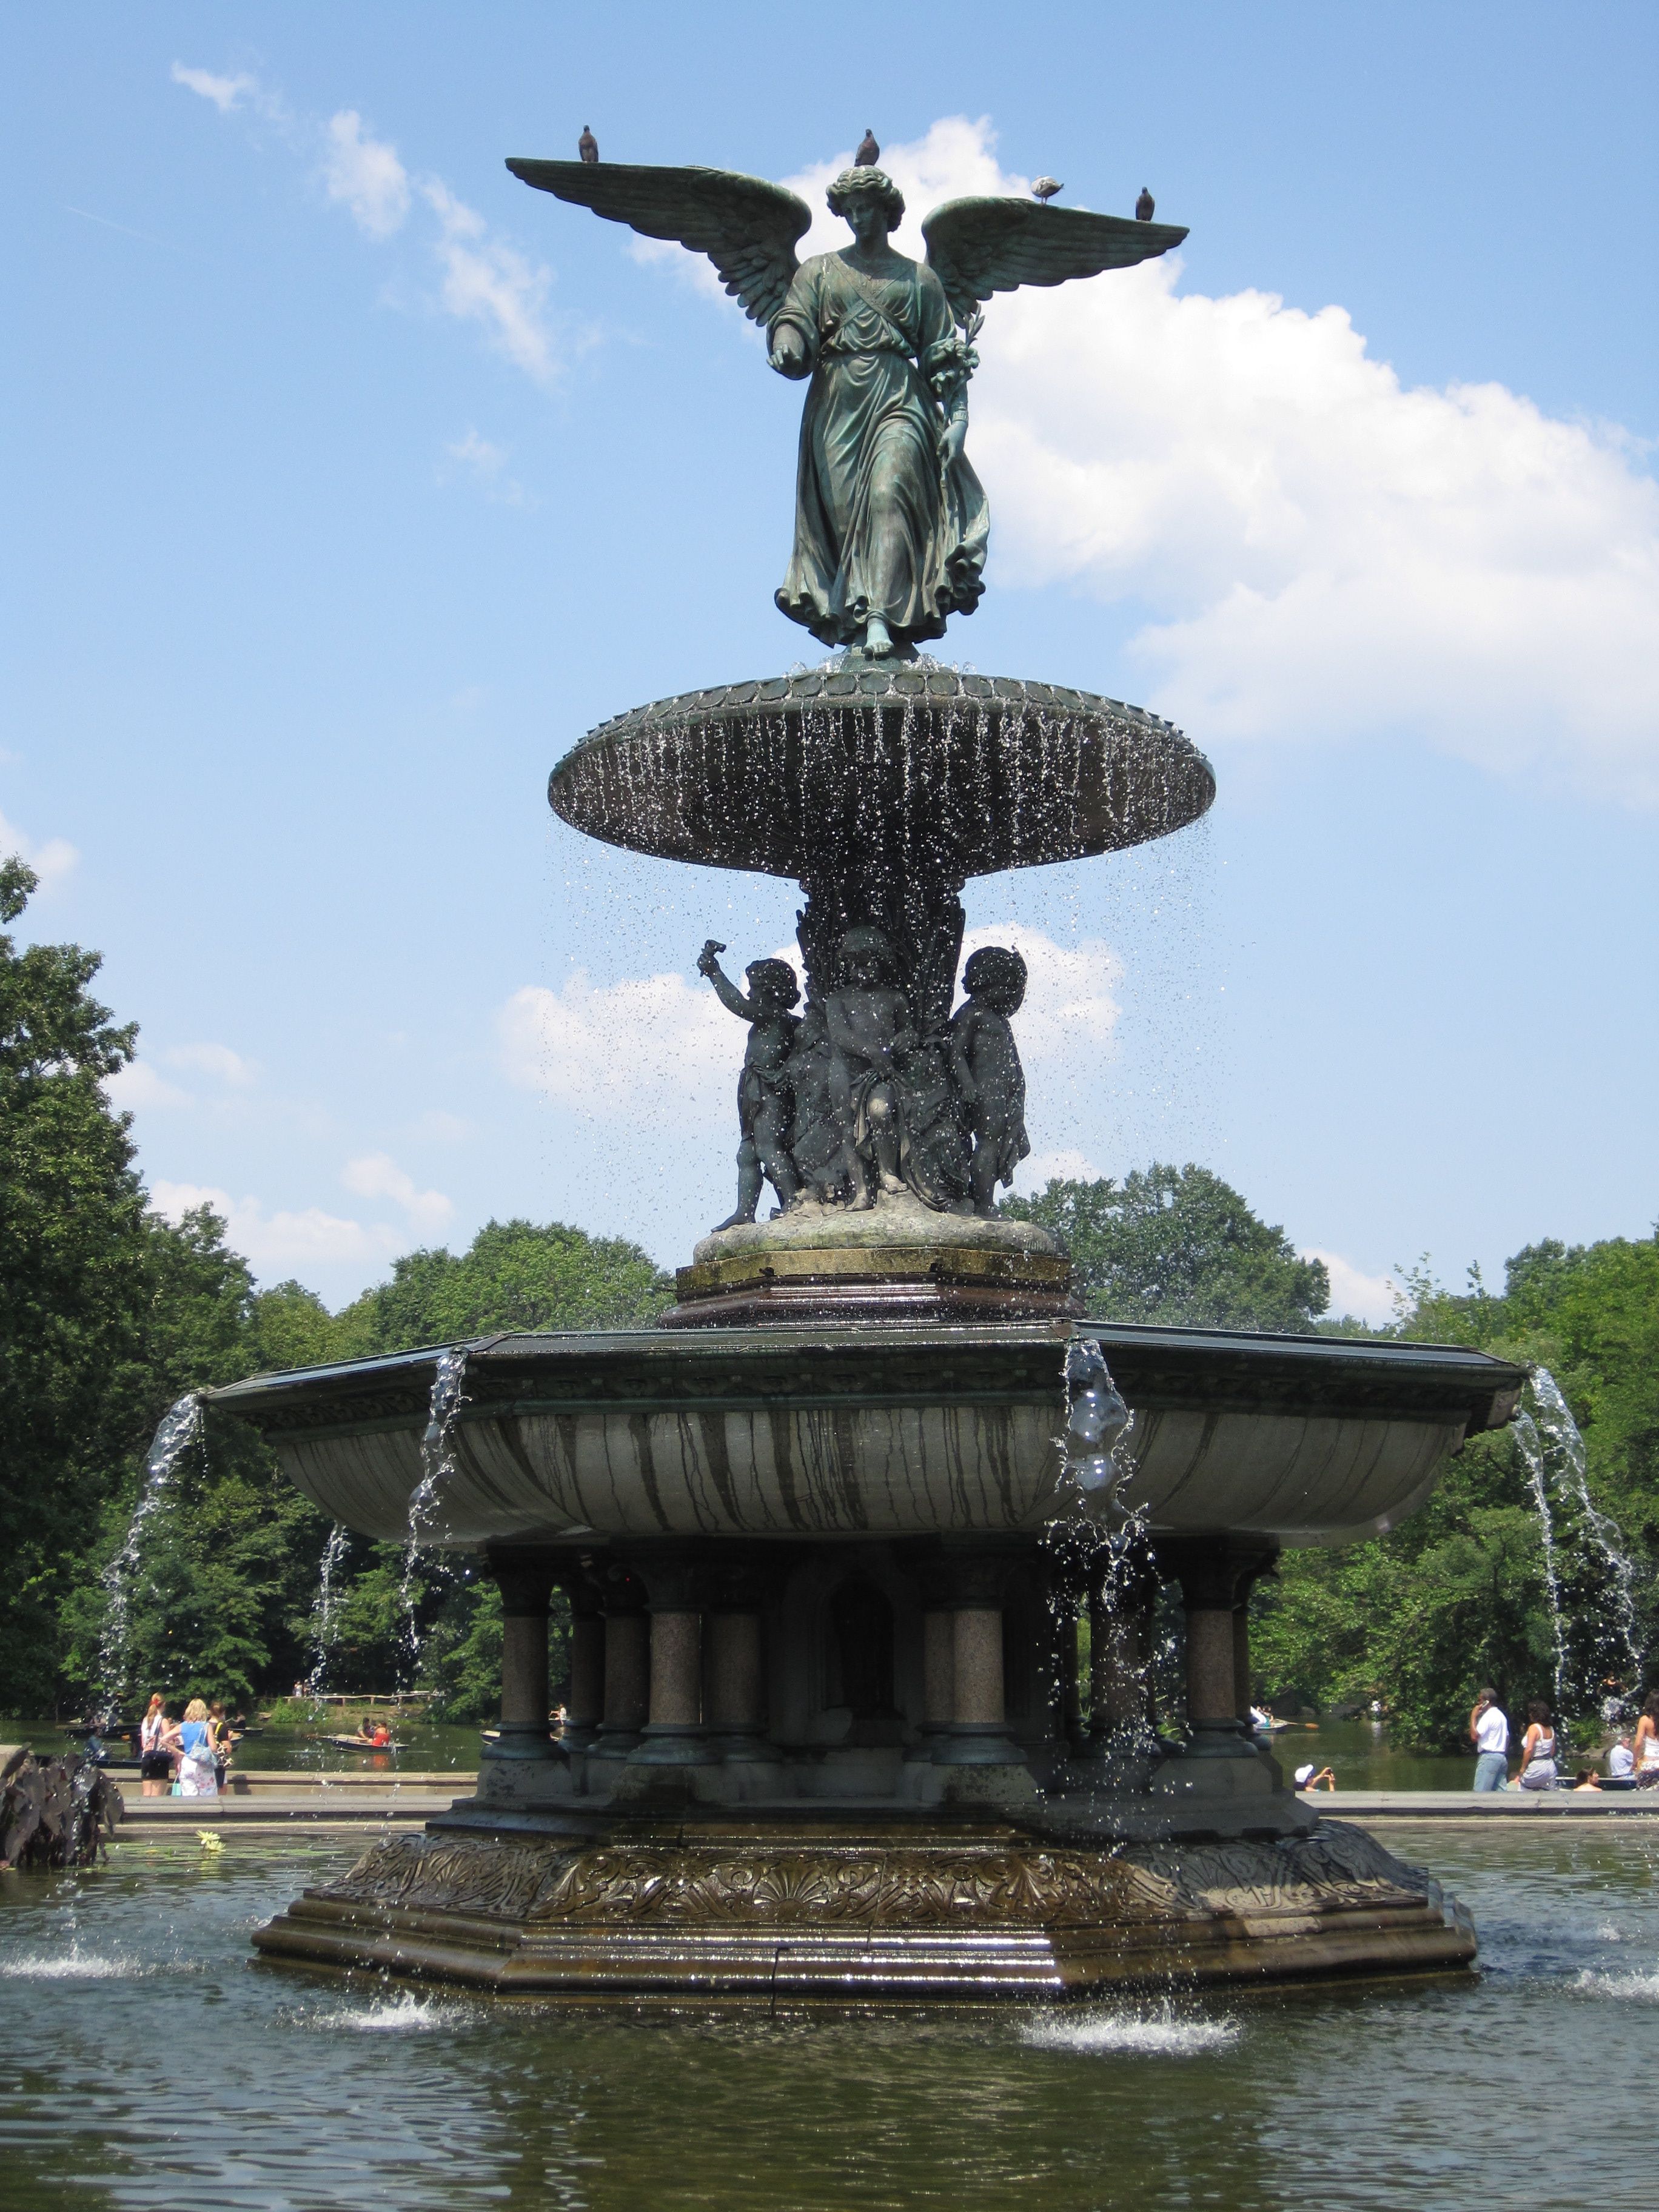 This just reminds me of 'Home Alone 2' ha! Bethesda Fountain ...